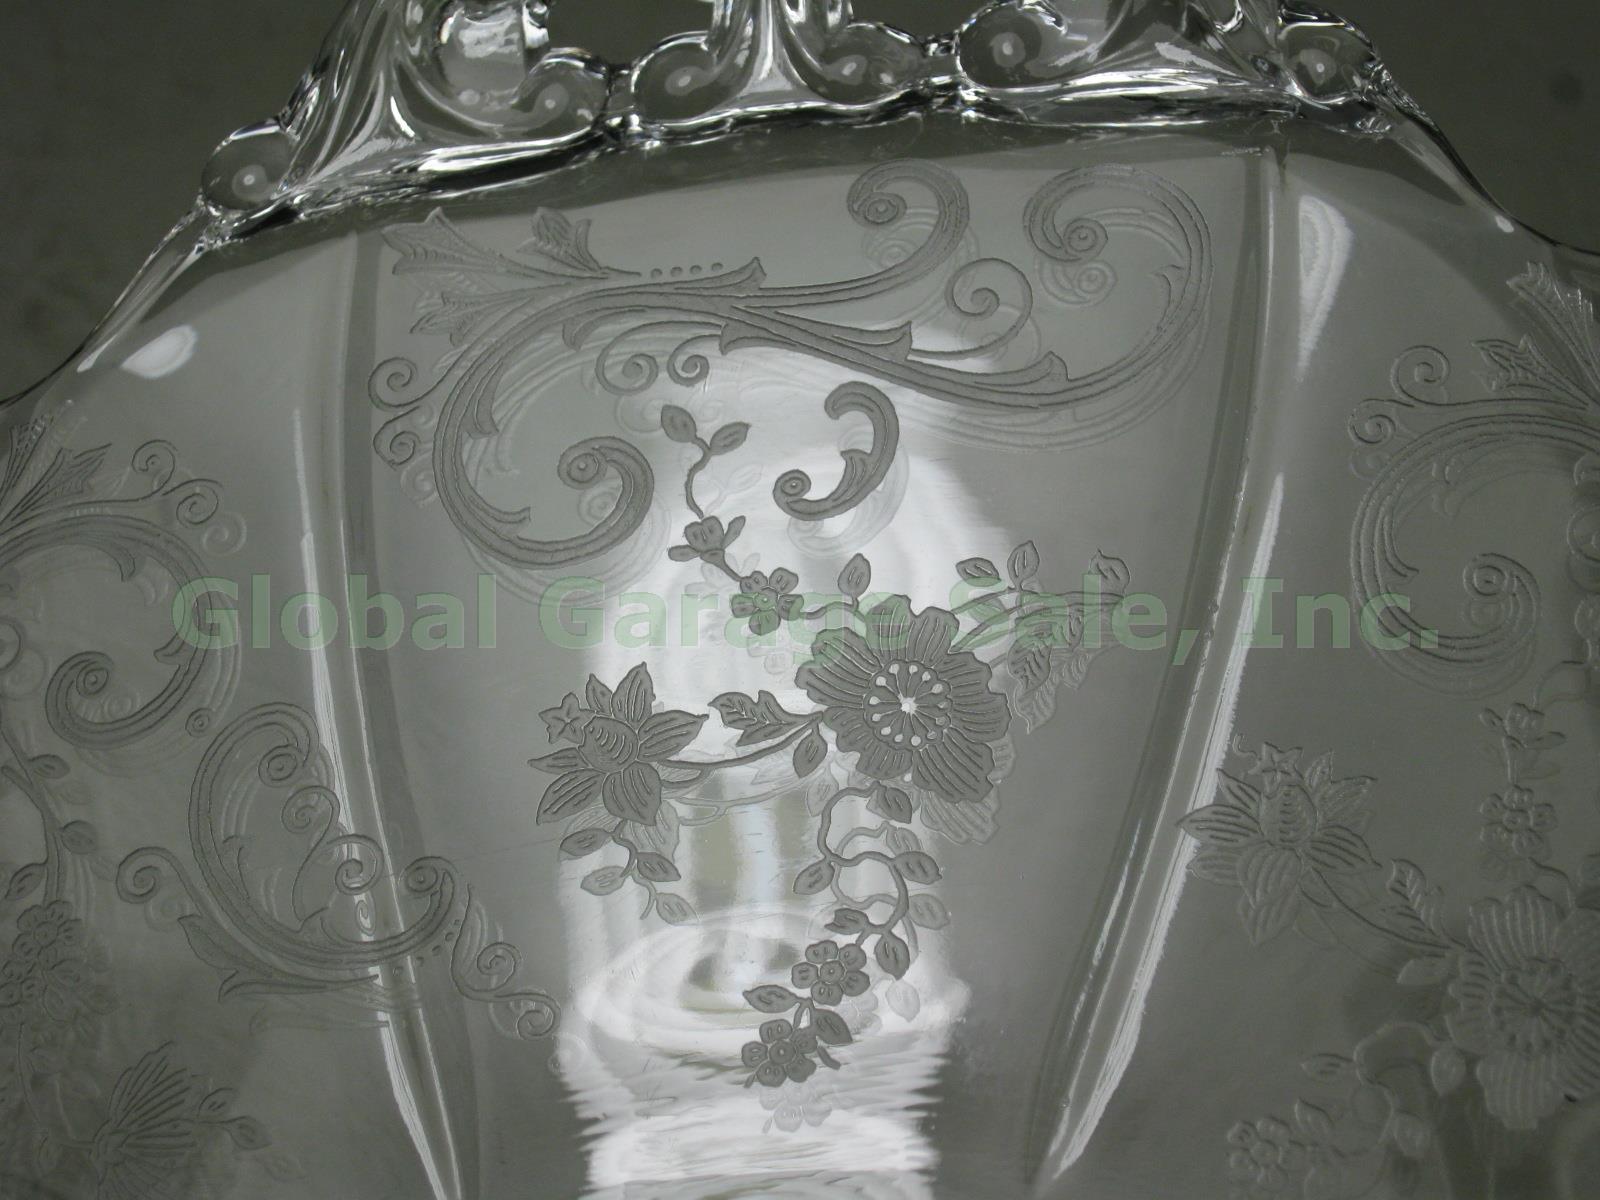 Cambridge Chantilly Etched Glass Serving Bowl Dish Handled Cake Plate Platter NR 4